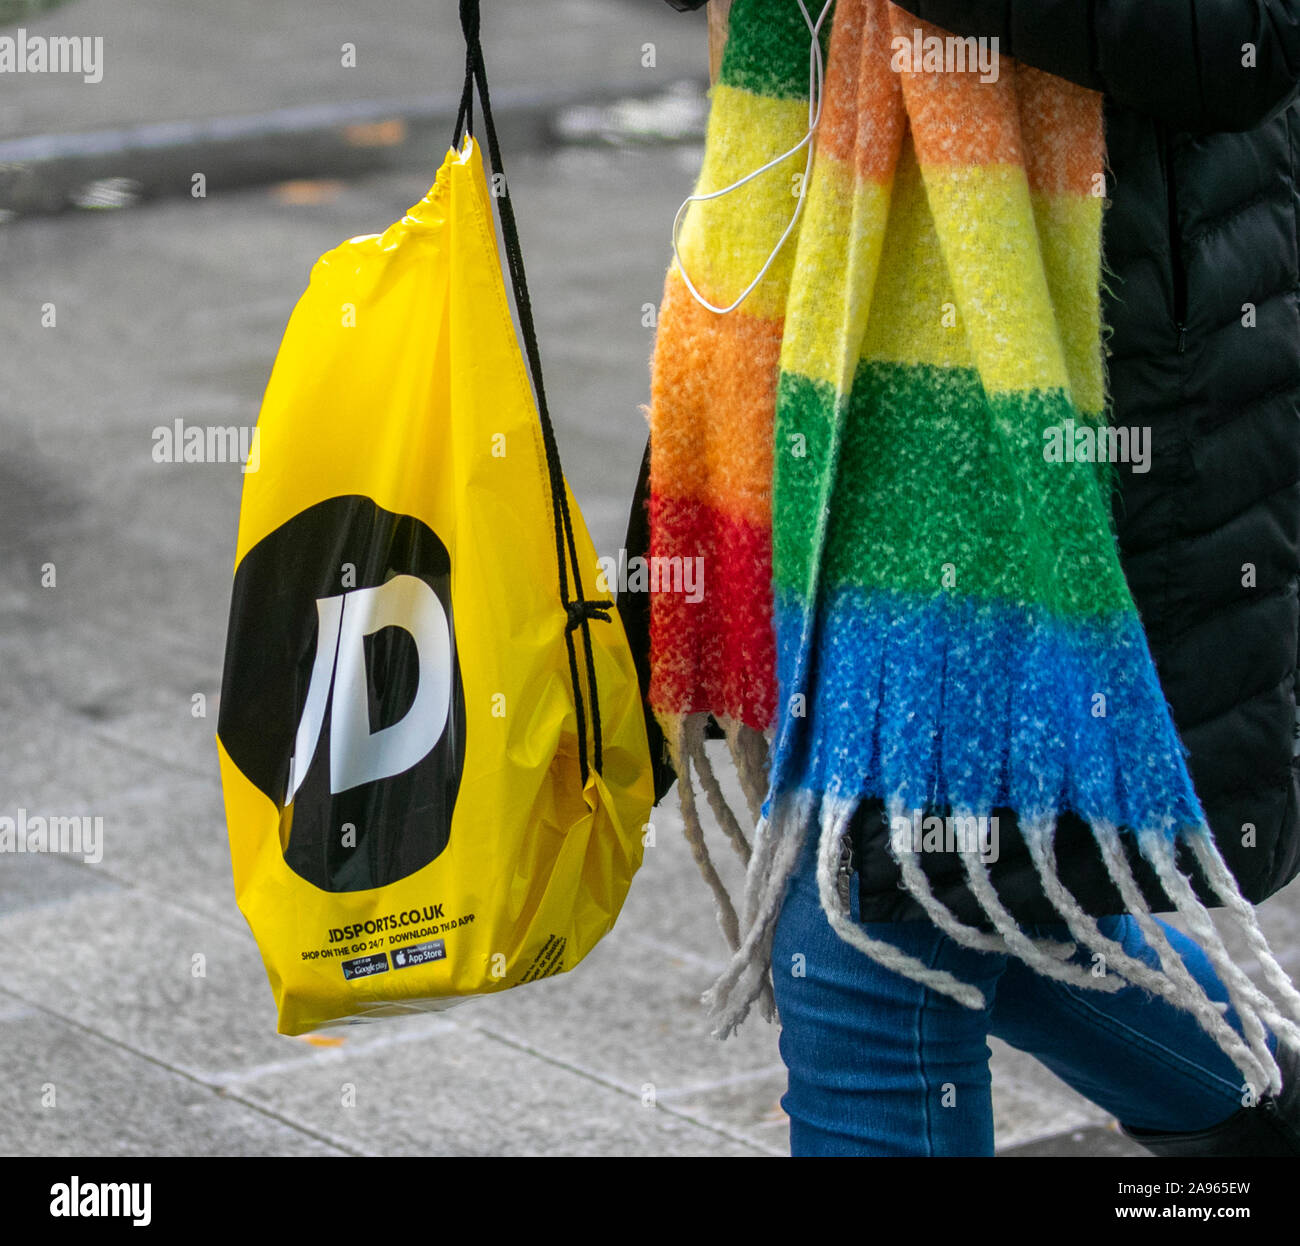 Woman carrying Yellow JD sports & LGBT Rainbow scarf; 100% recycled  reusable store Bags for Life, Chapel Street, Preston, UK Stock Photo - Alamy